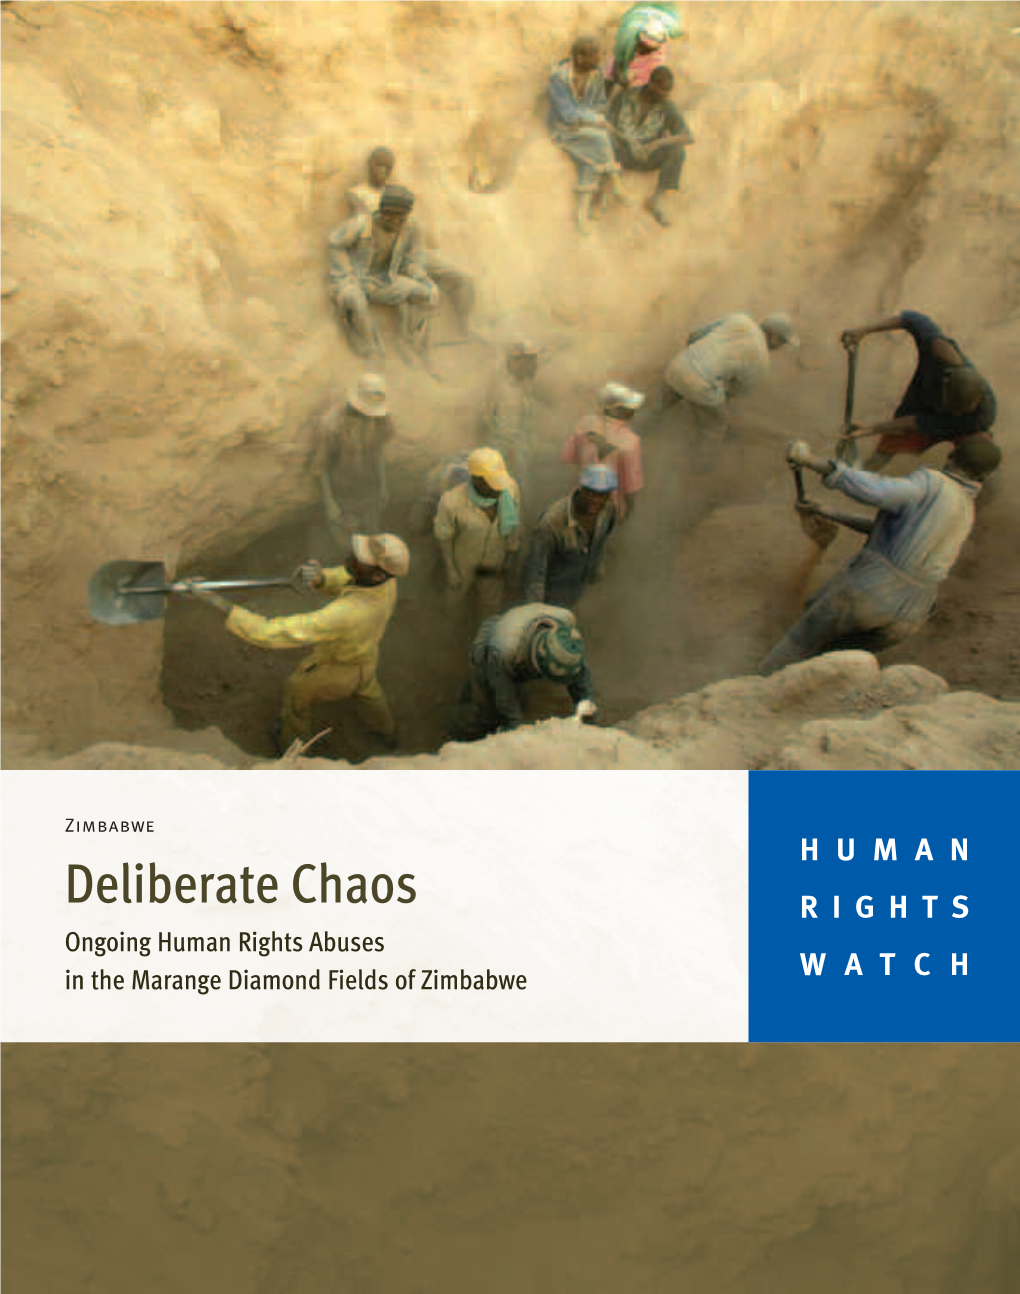 Deliberate Chaos RIGHTS Ongoing Human Rights Abuses in the Marange Diamond Fields of Zimbabwe WATCH